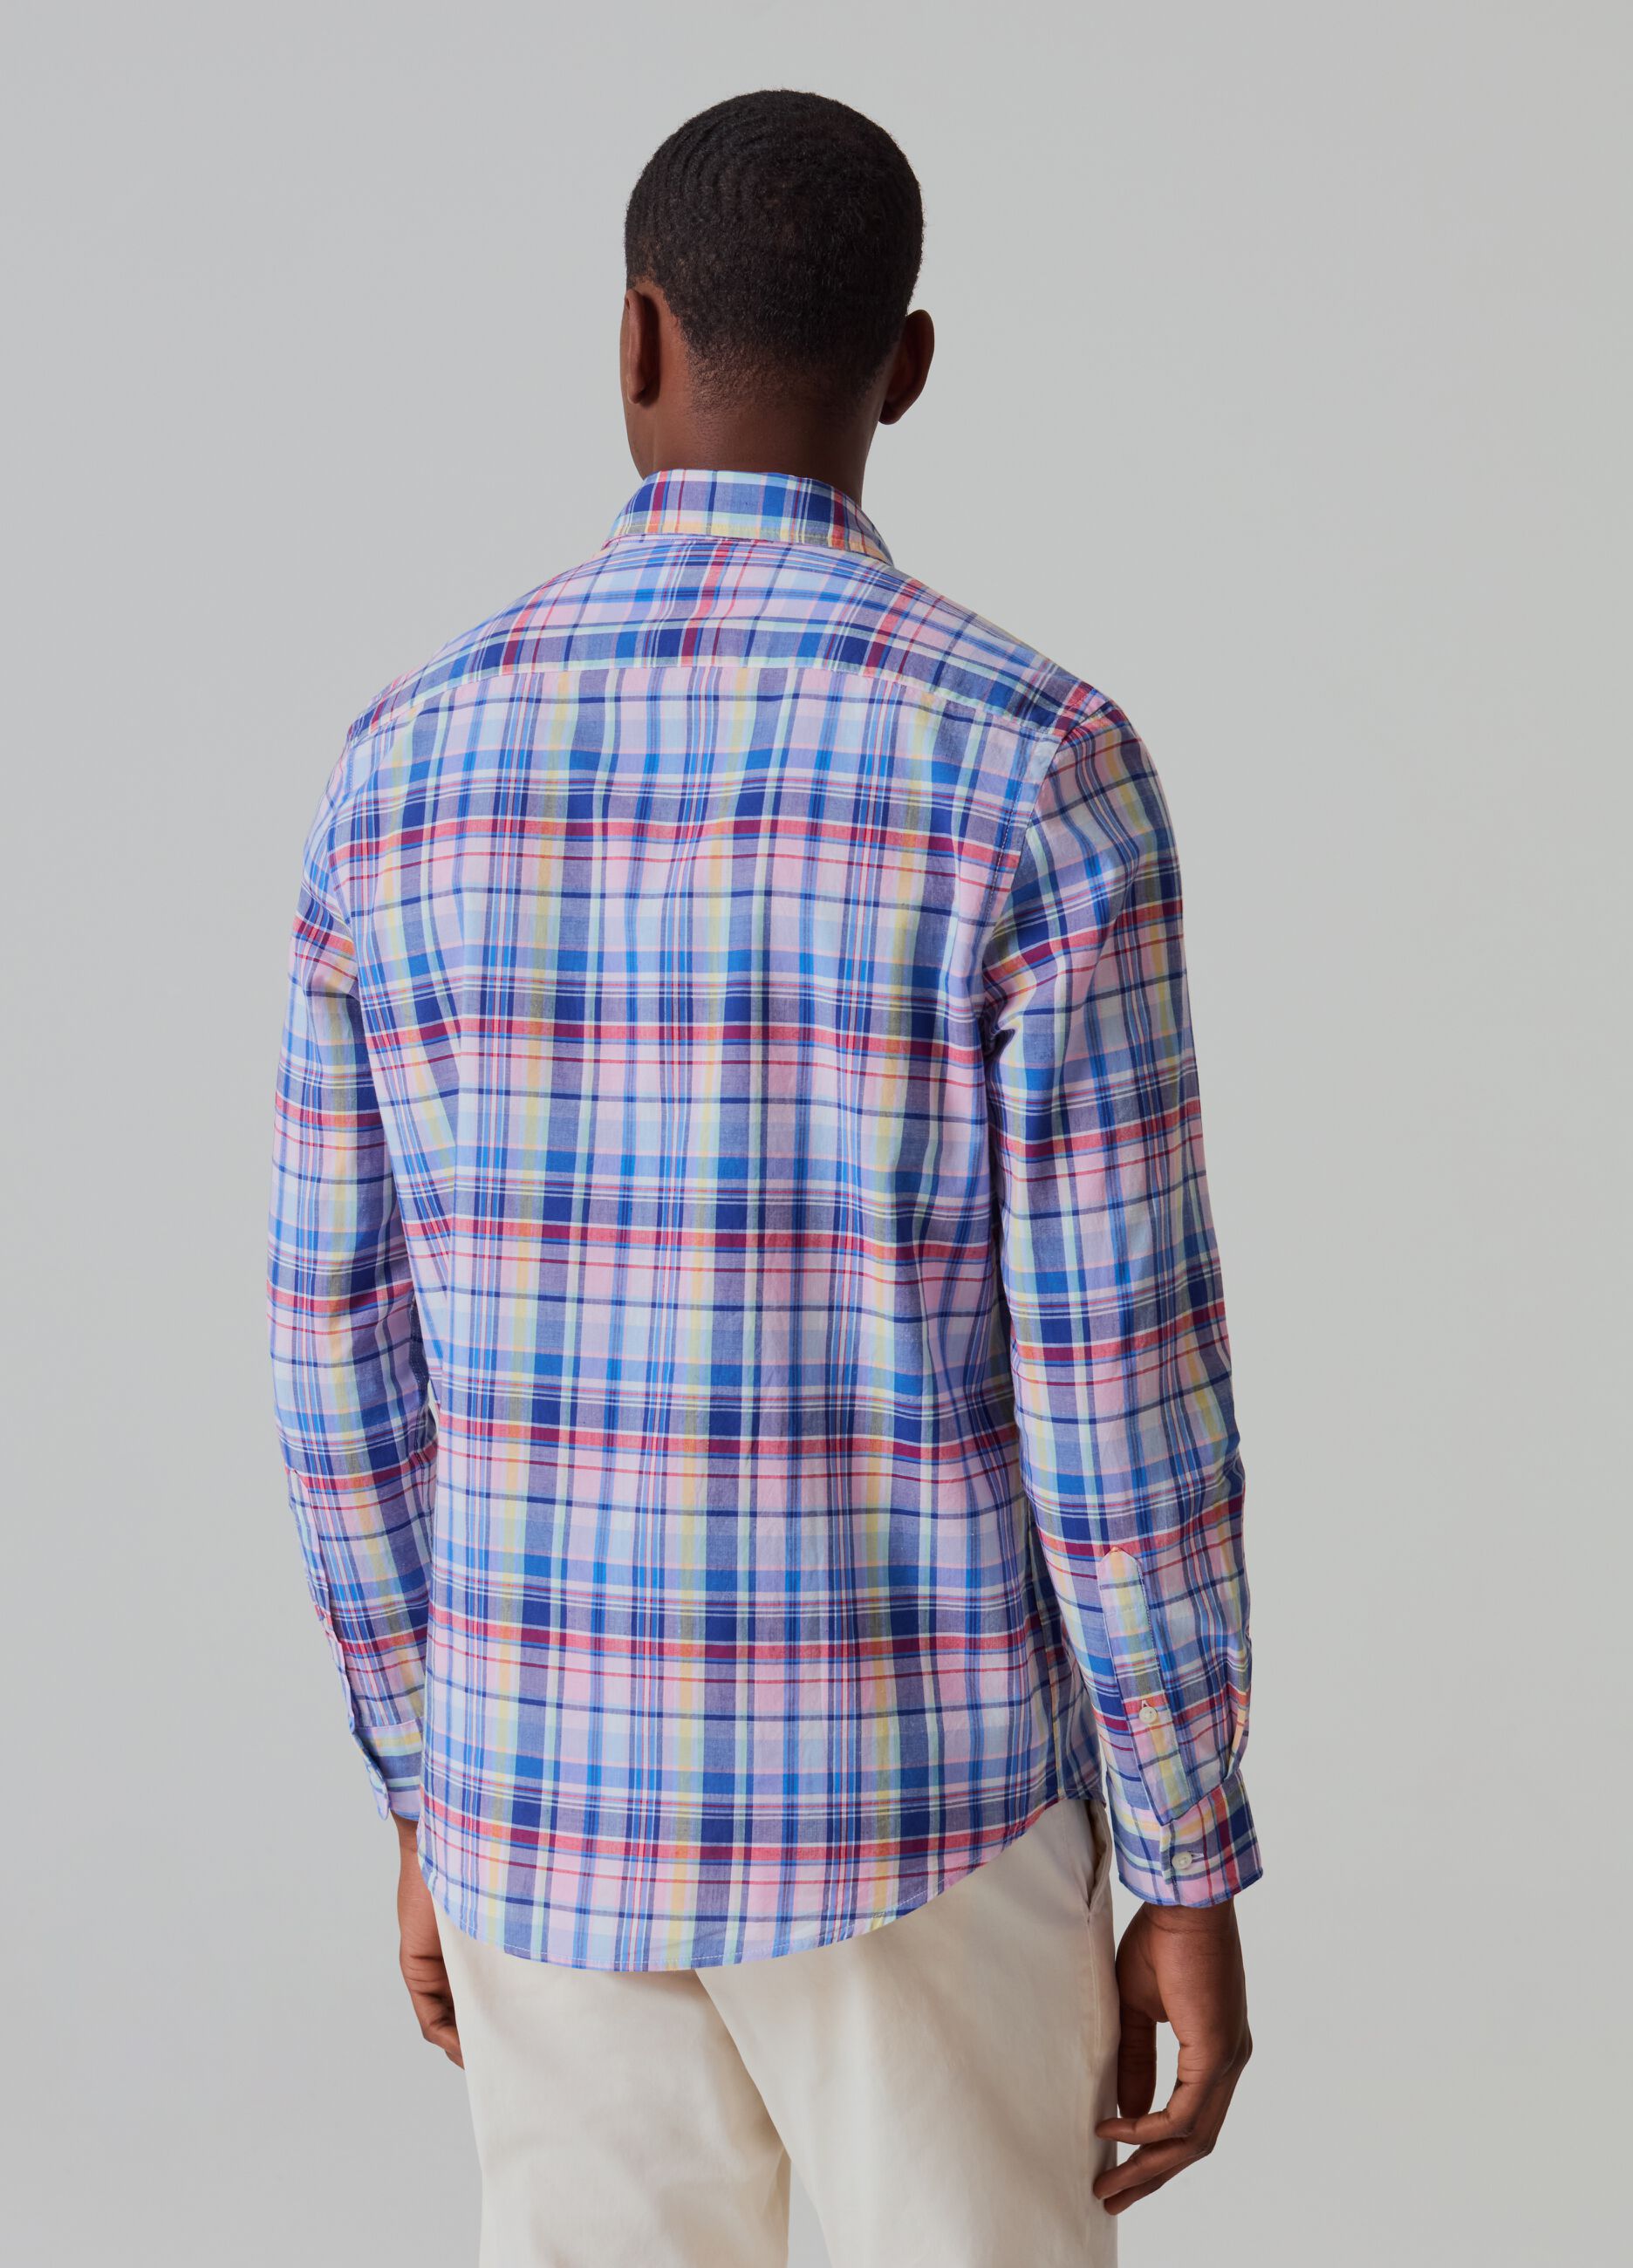 Check cotton shirt with pocket